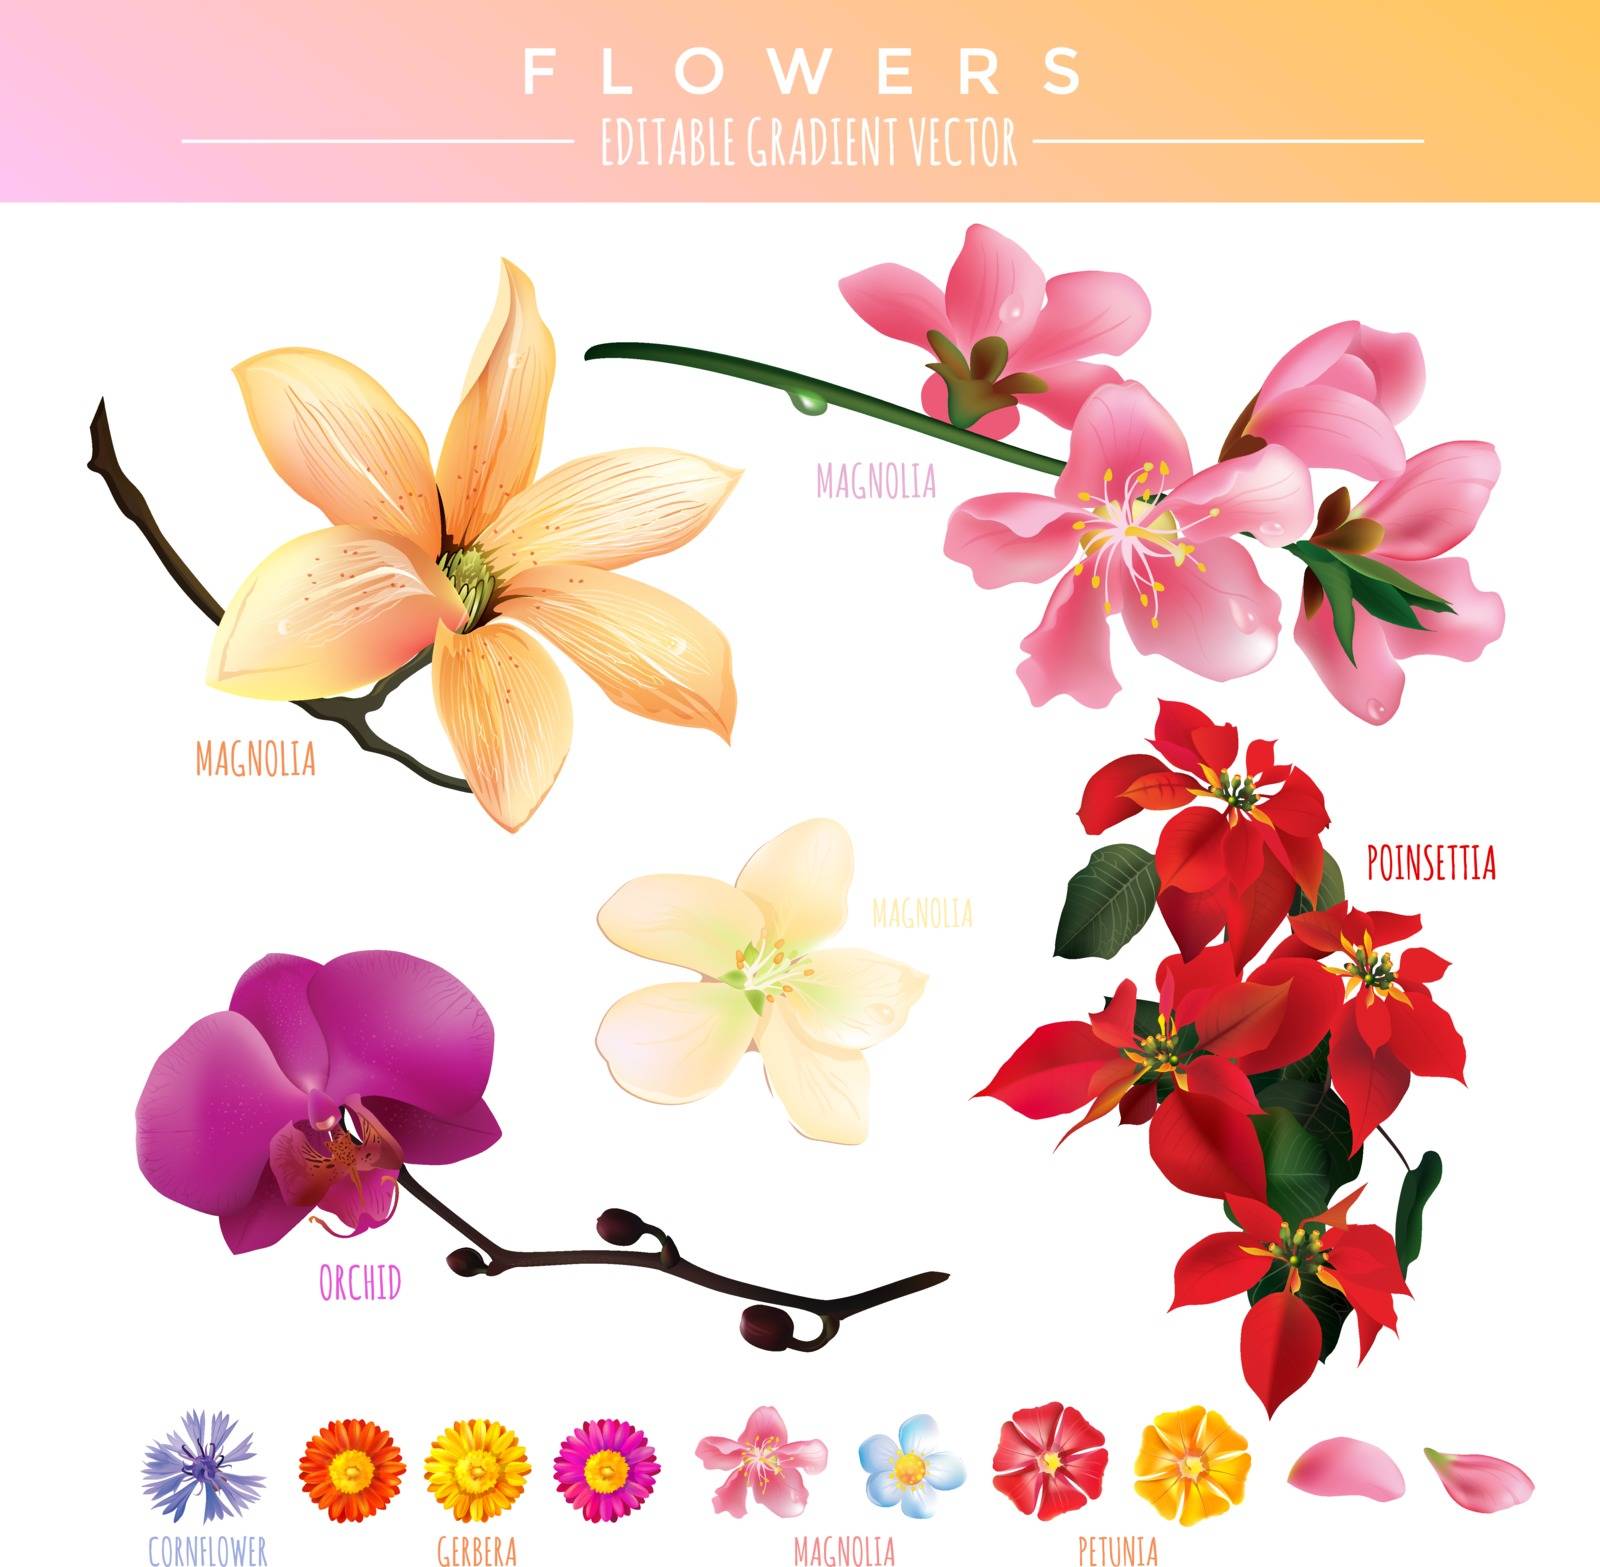 Flowers mesh gradient vector illustration on a white background.